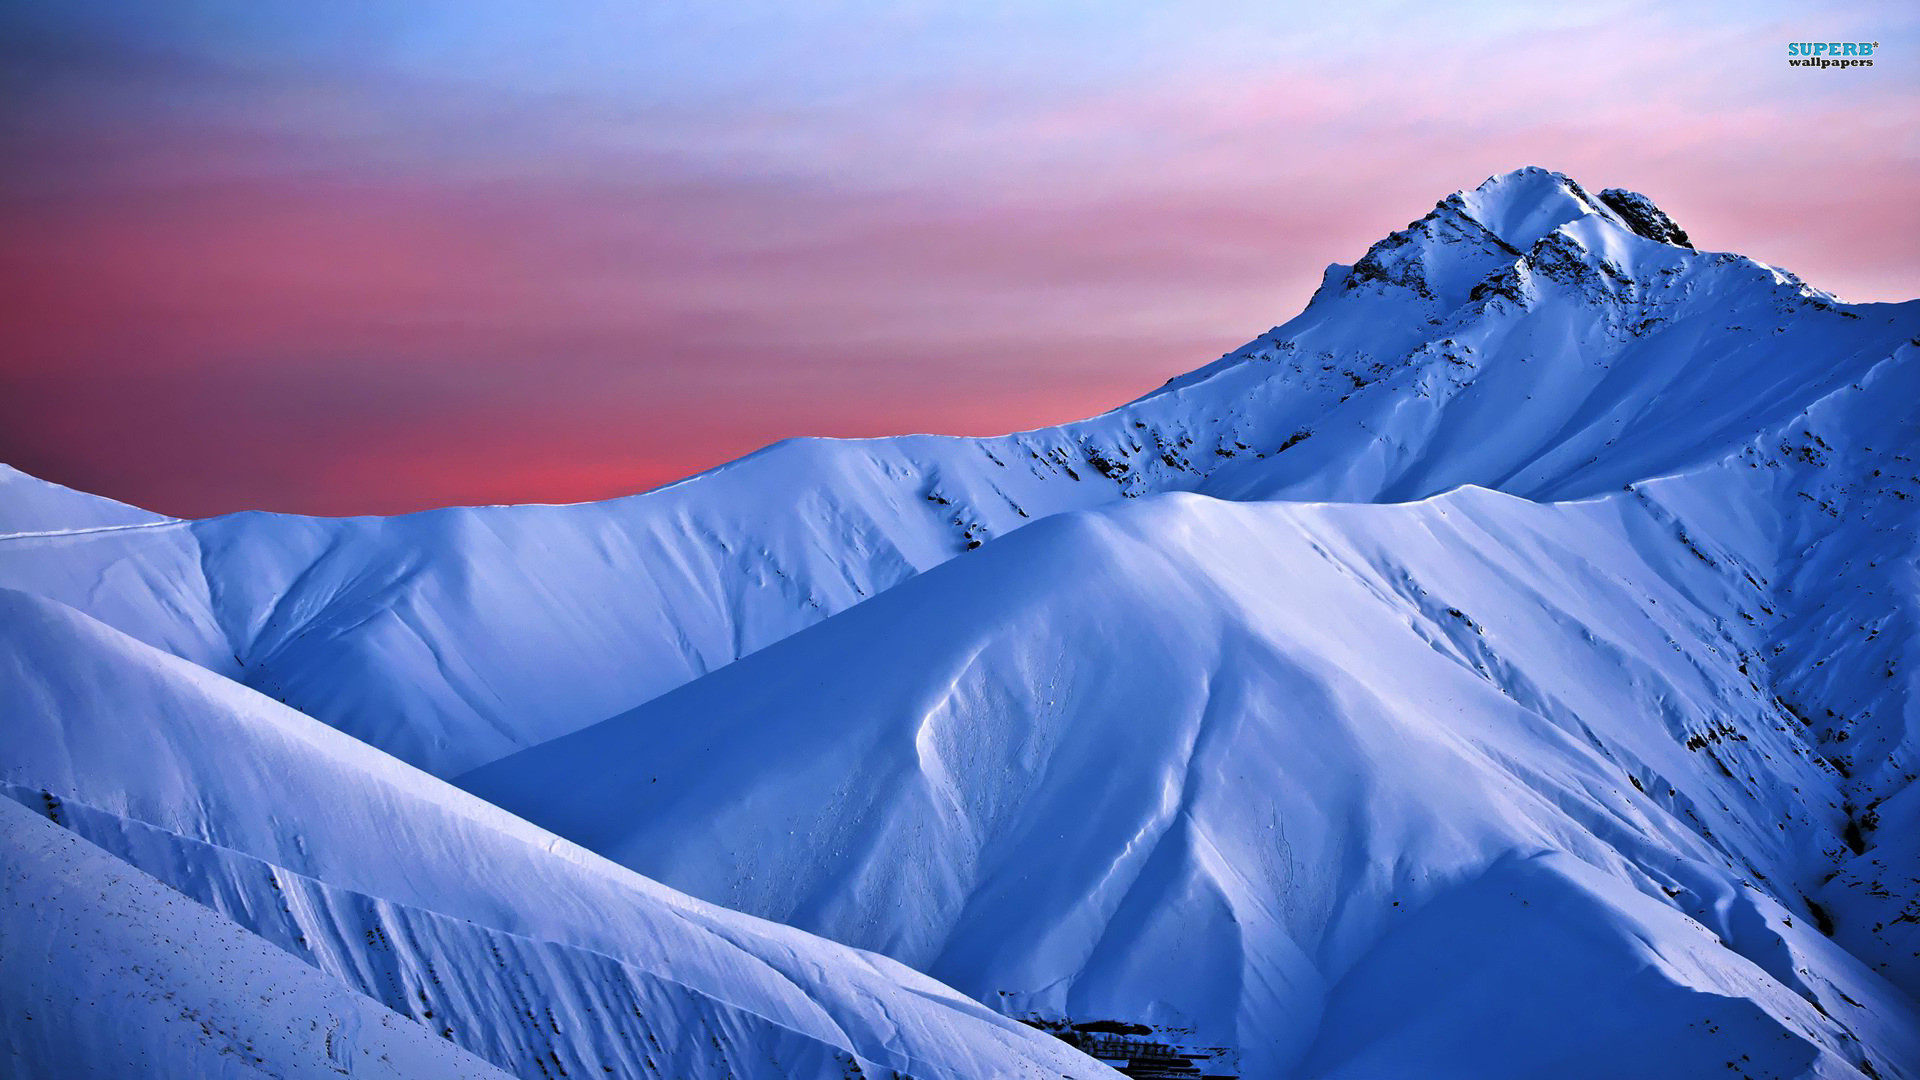 1920x1080 Snow Mountain Wallpapers Full Hd